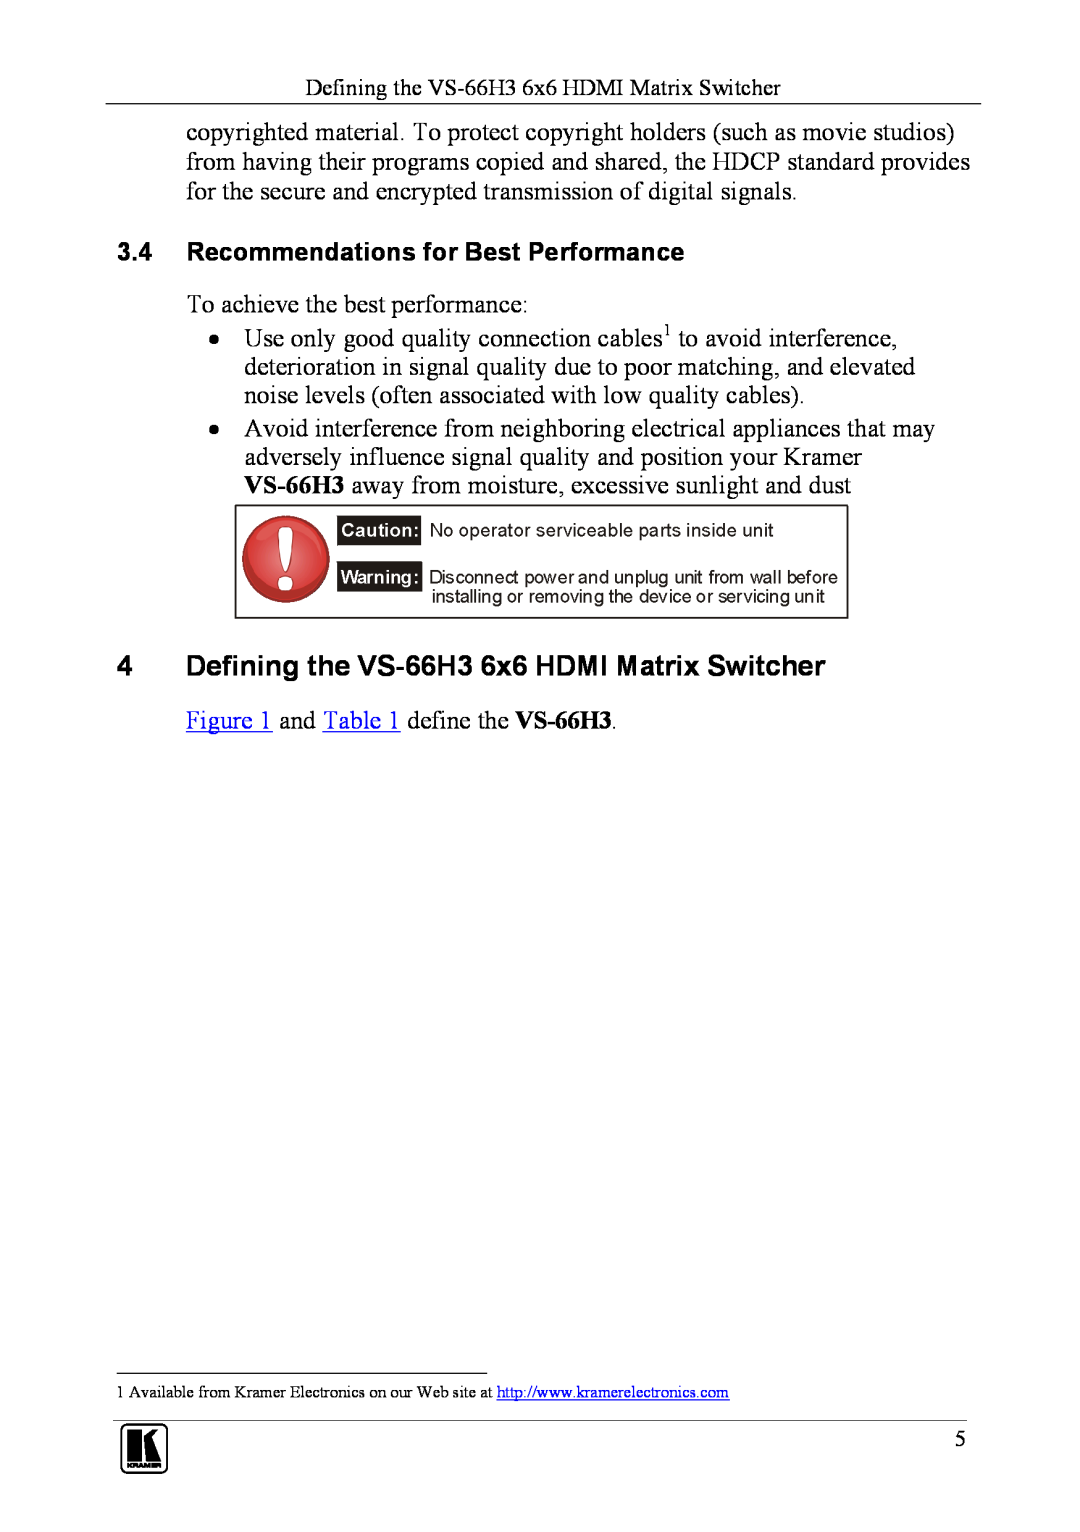 Kramer Electronics user manual 4Defining the VS-66H36x6 HDMI Matrix Switcher, 3.4Recommendations for Best Performance 